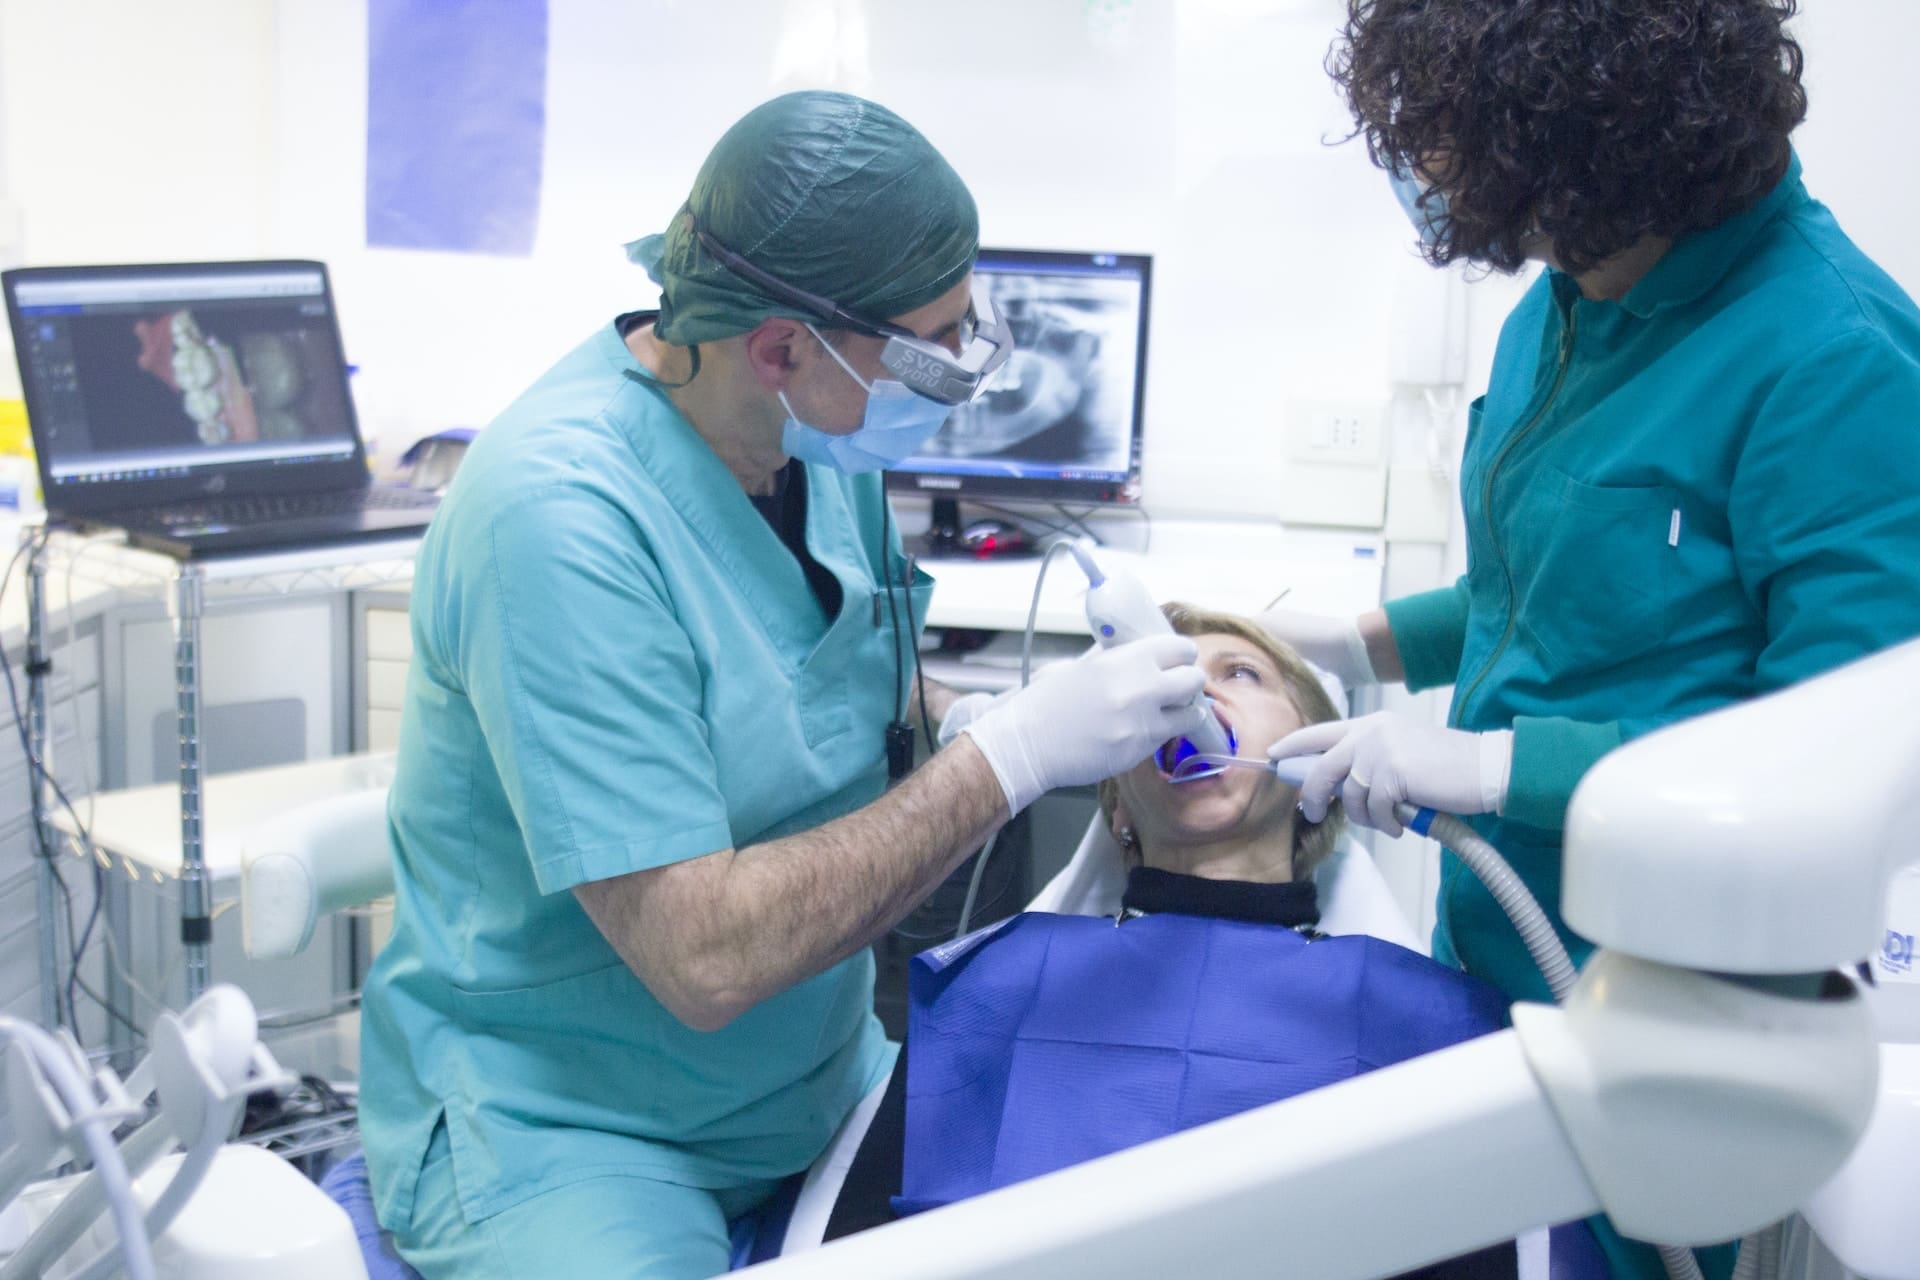 Senior dentist in surgical uniform, assisted by his assistant, placing a medical instrument into the patient's mouth during dental care.